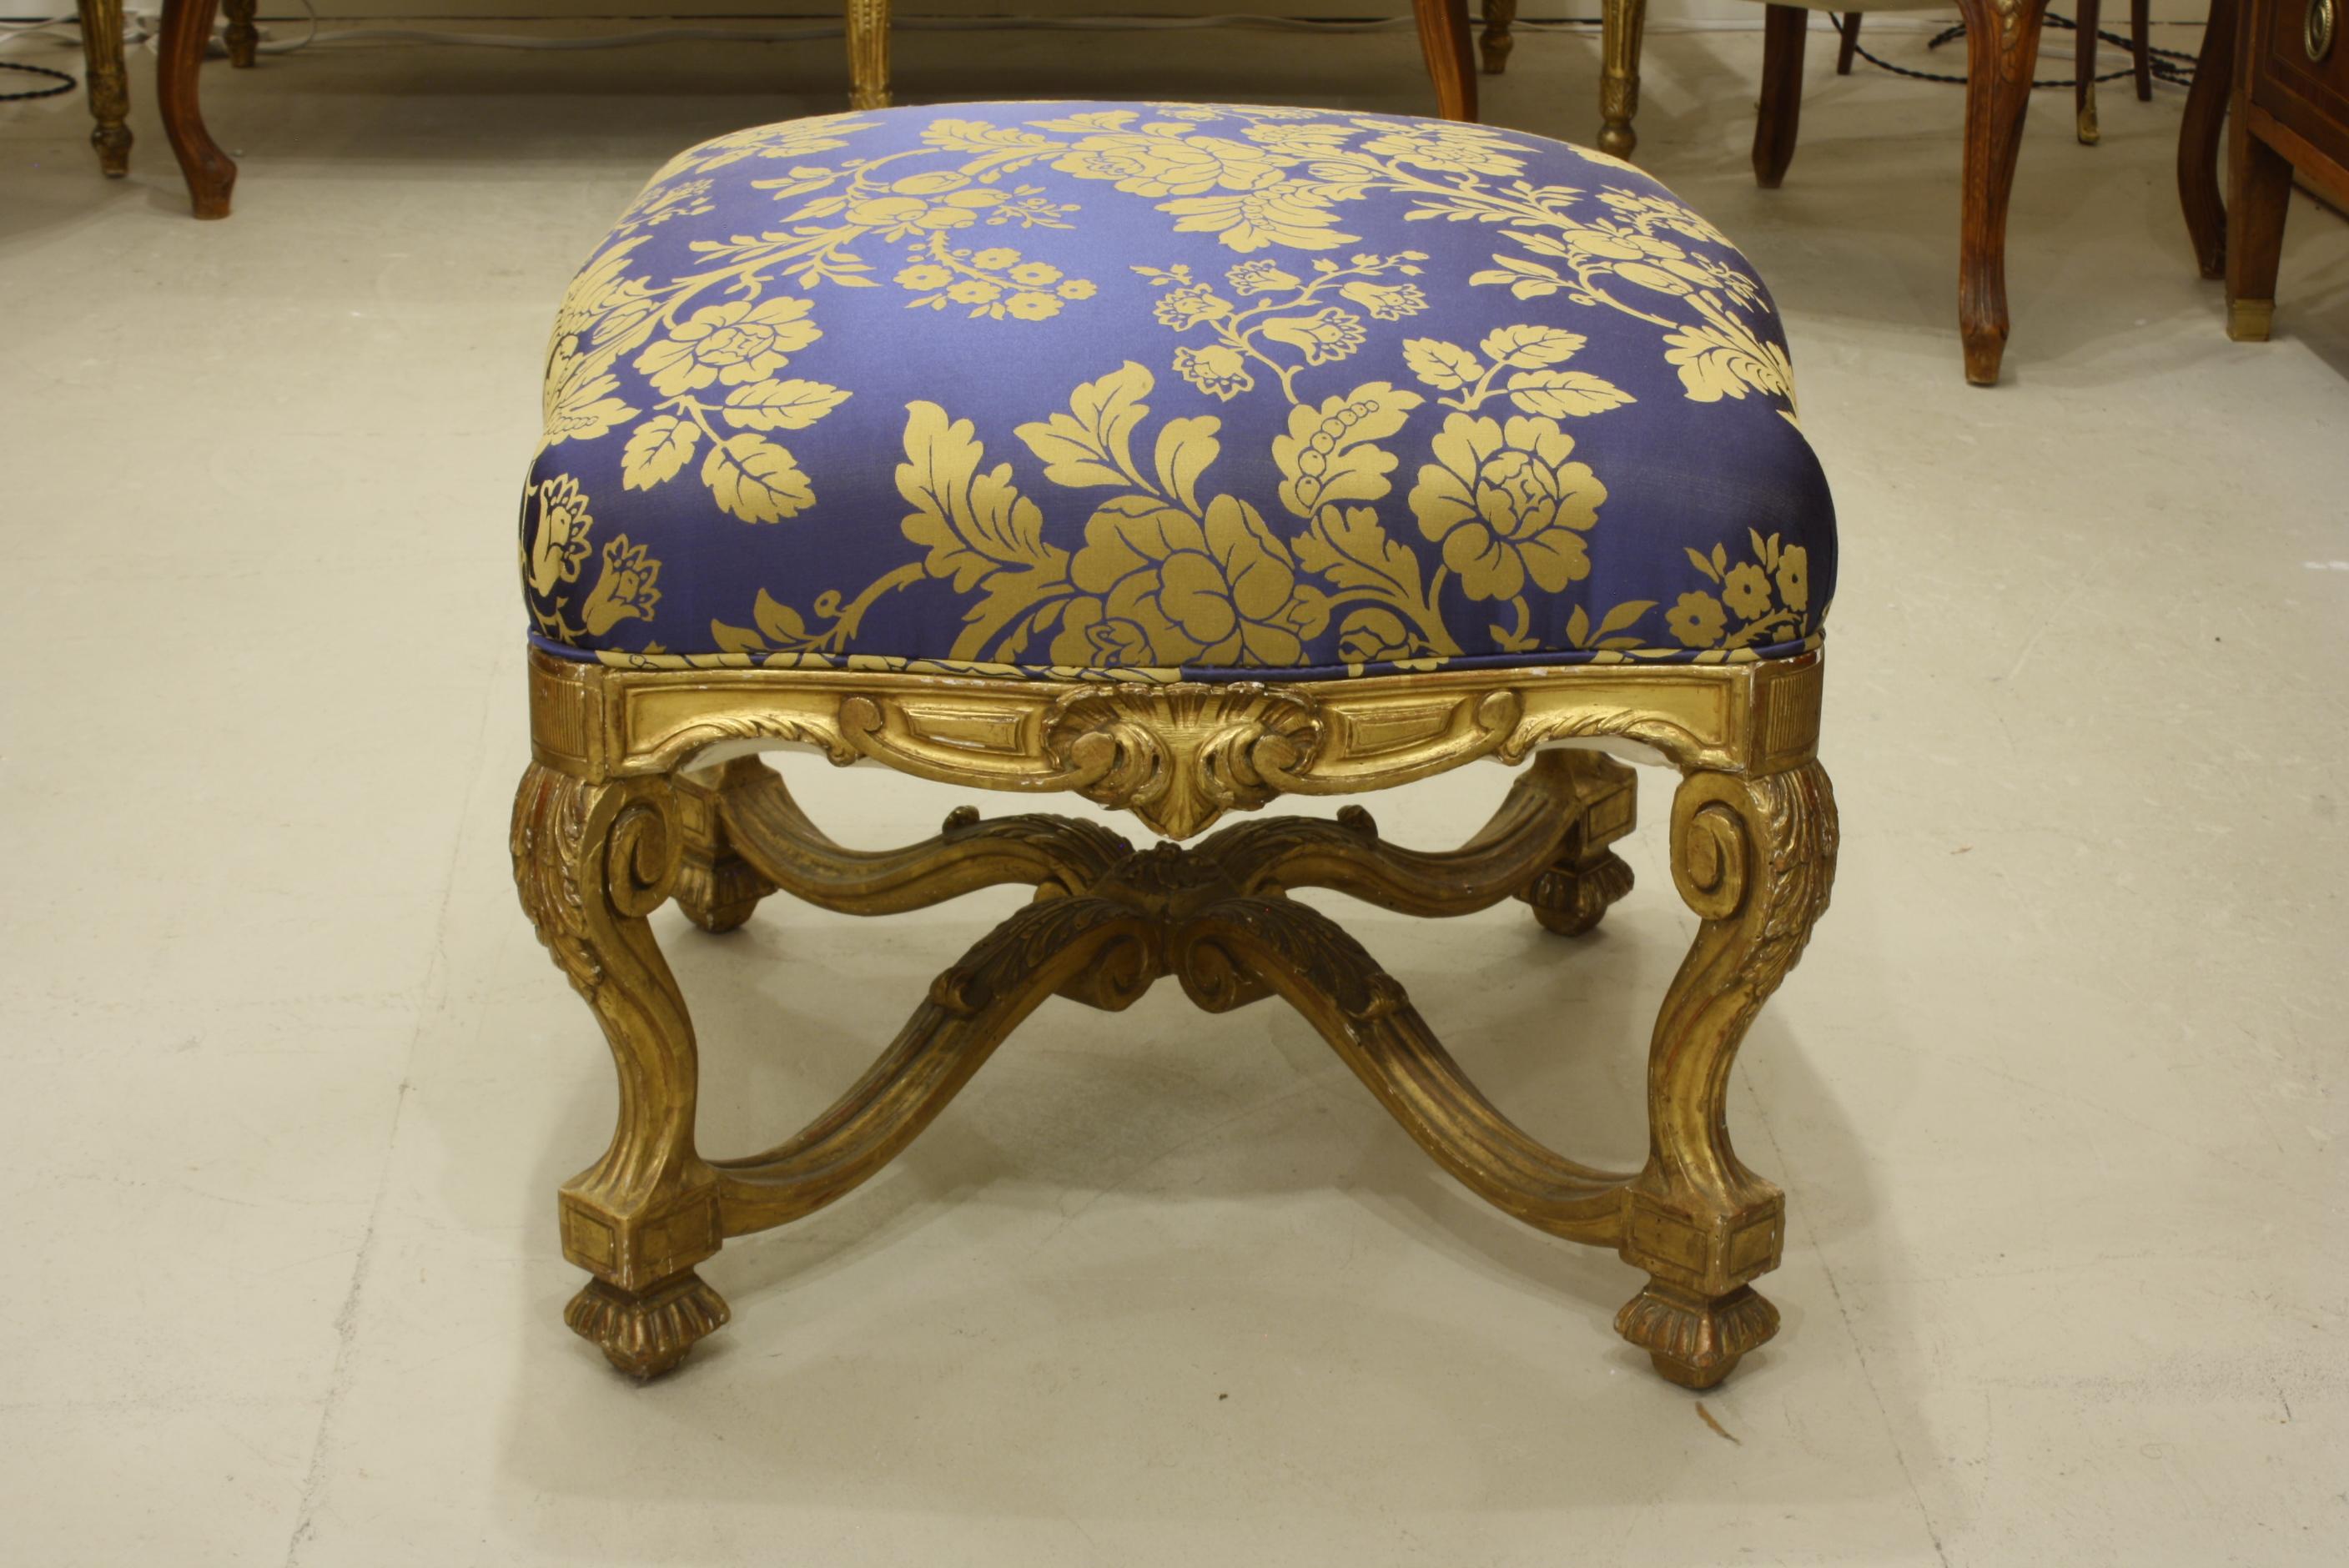 Régence French Regence Style Carved Giltwood Stool, Tabouret or Ottoman